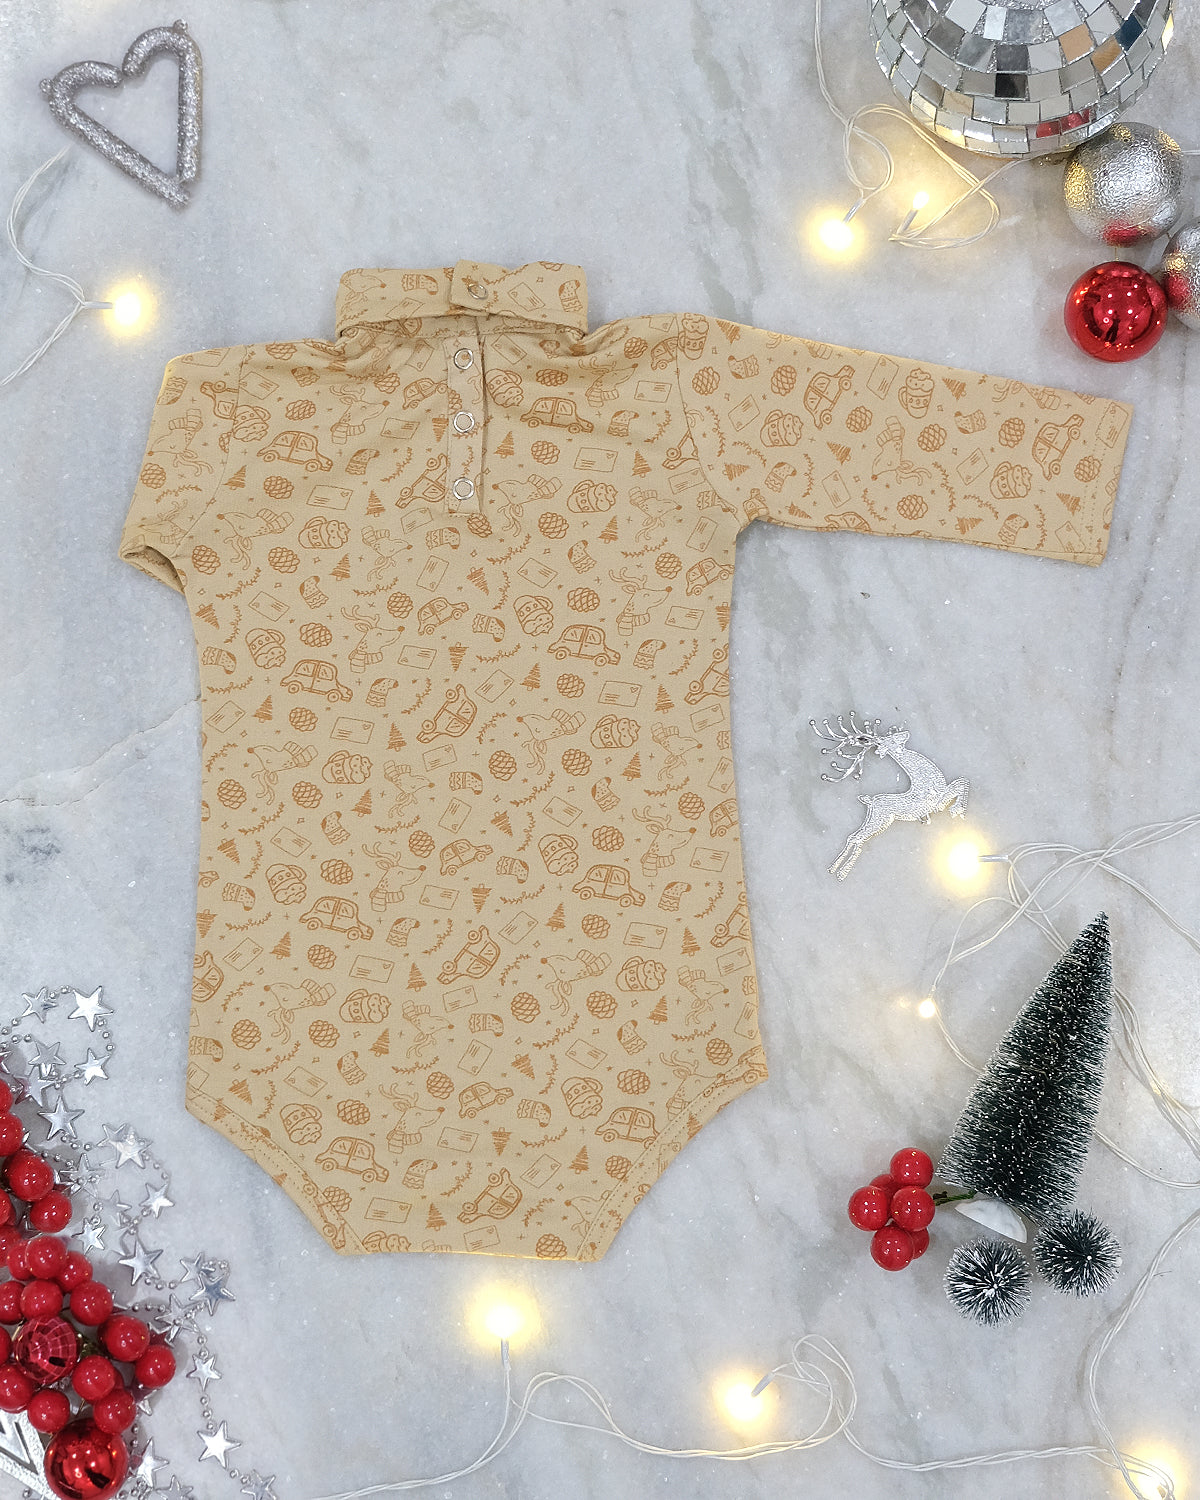 December Dream, Toffee Nut and Frost Cotton Terry Unisex Turtleneck Onesies, Set of 3